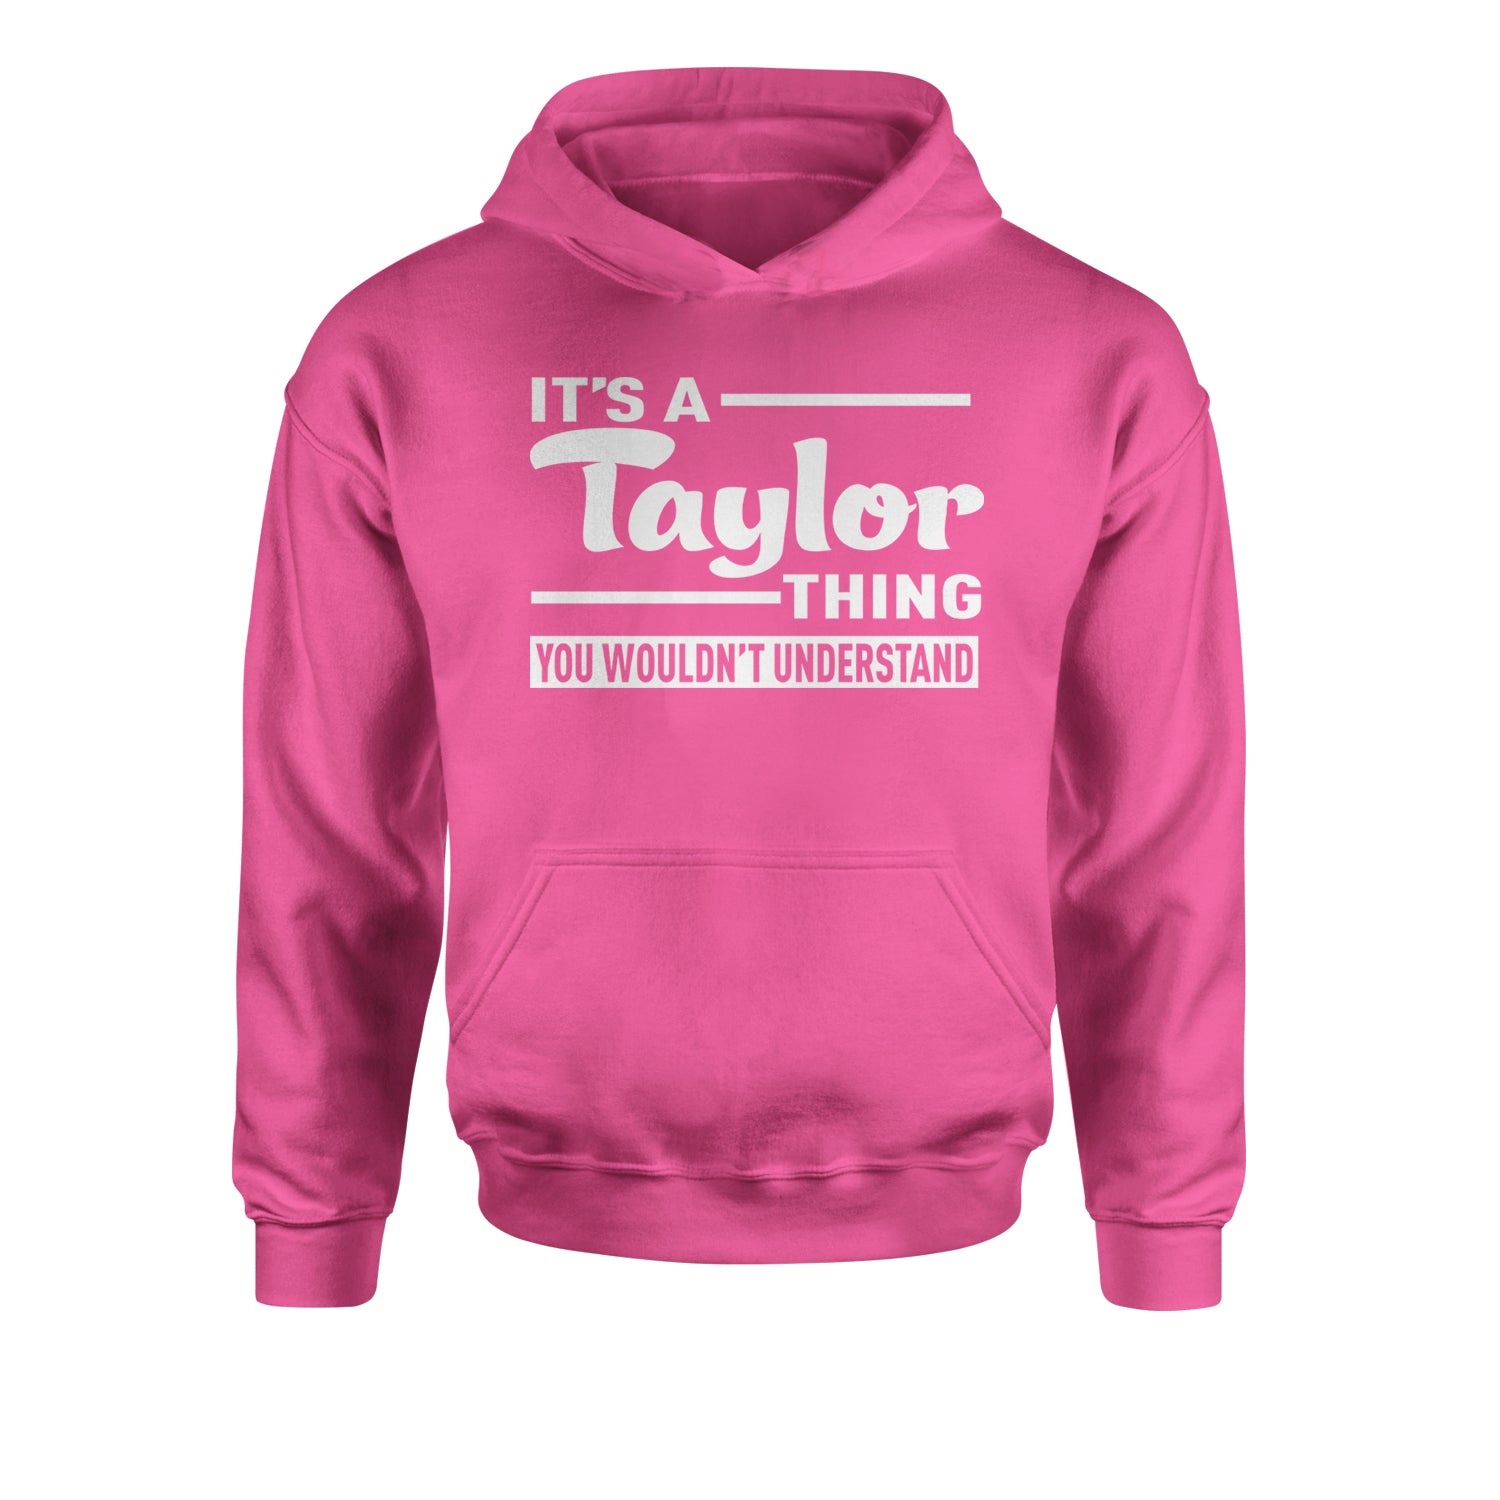 It's A Taylor Thing, You Wouldn't Understand Youth-Sized Hoodie nation, taylornation by Expression Tees